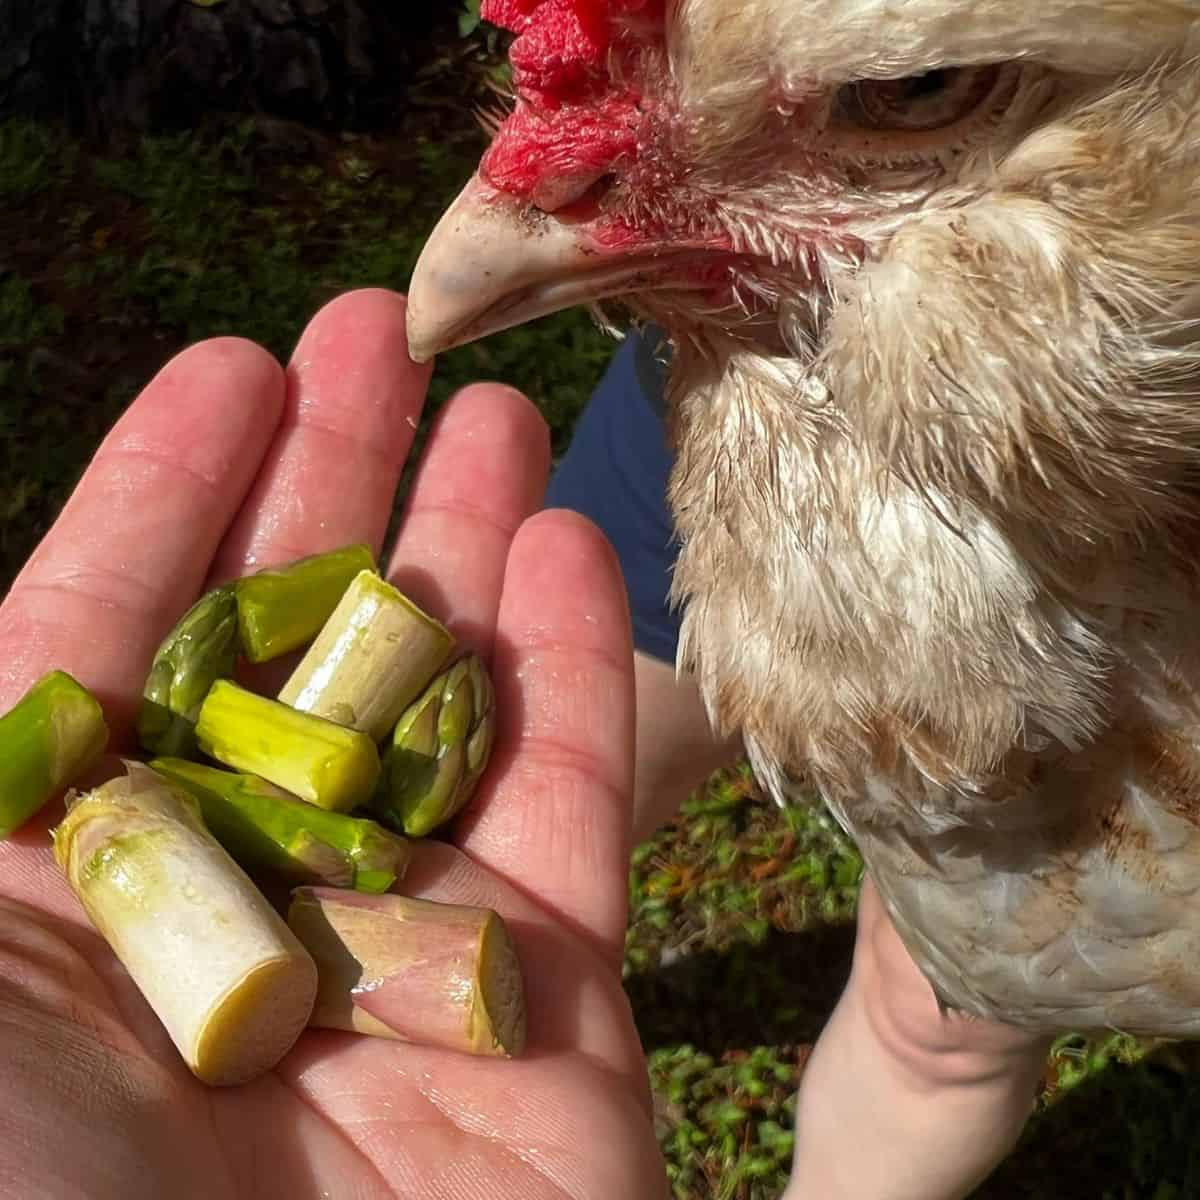 Chicken eating asparagus out of a hand.